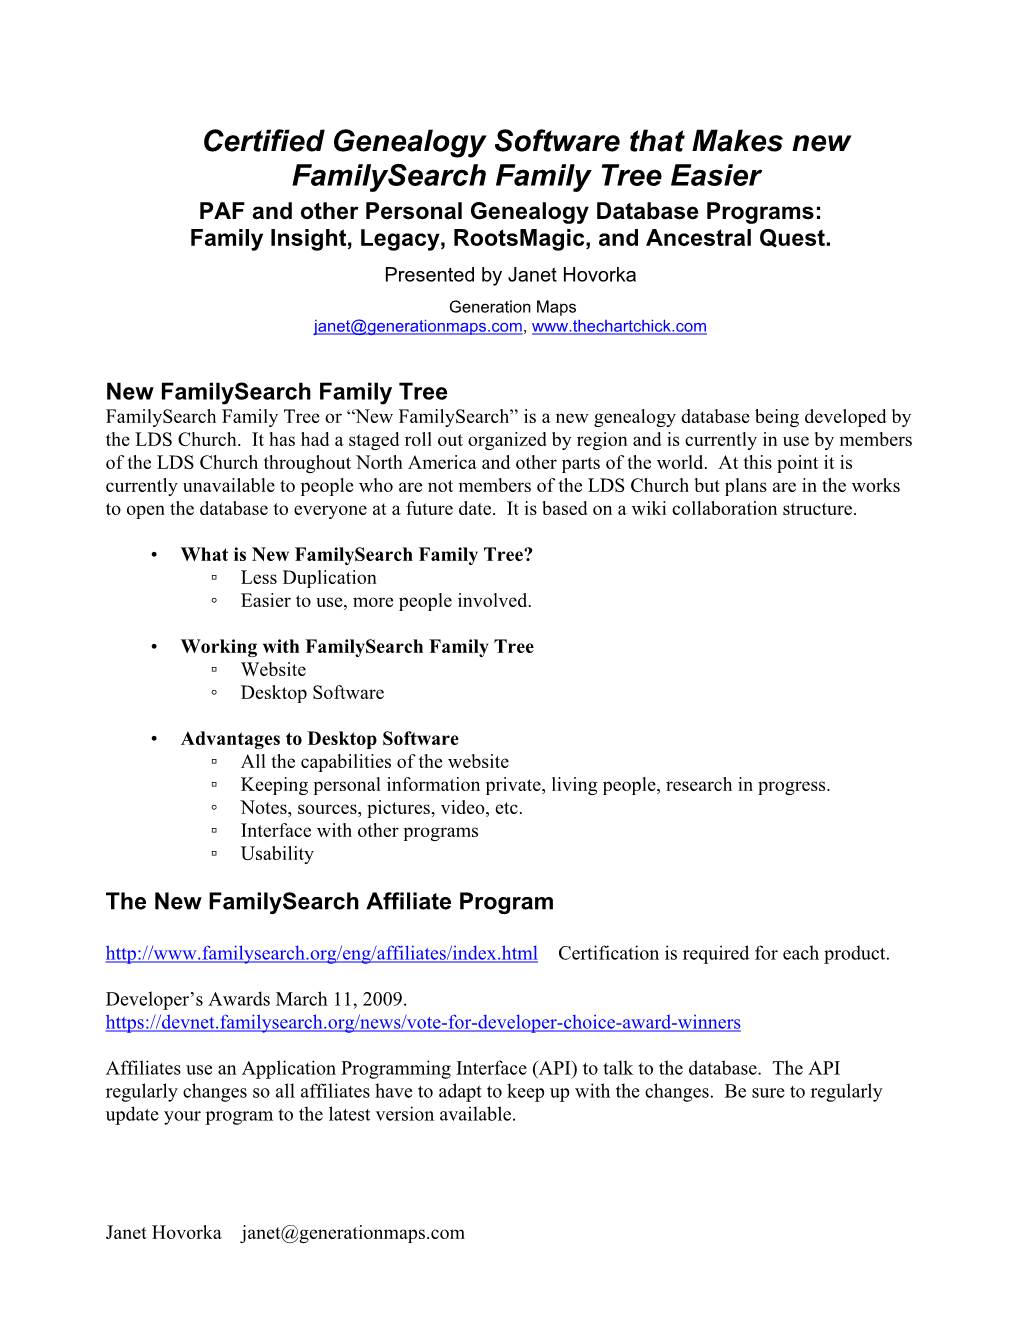 Certified Genealogy Software That Makes New Familysearch Family